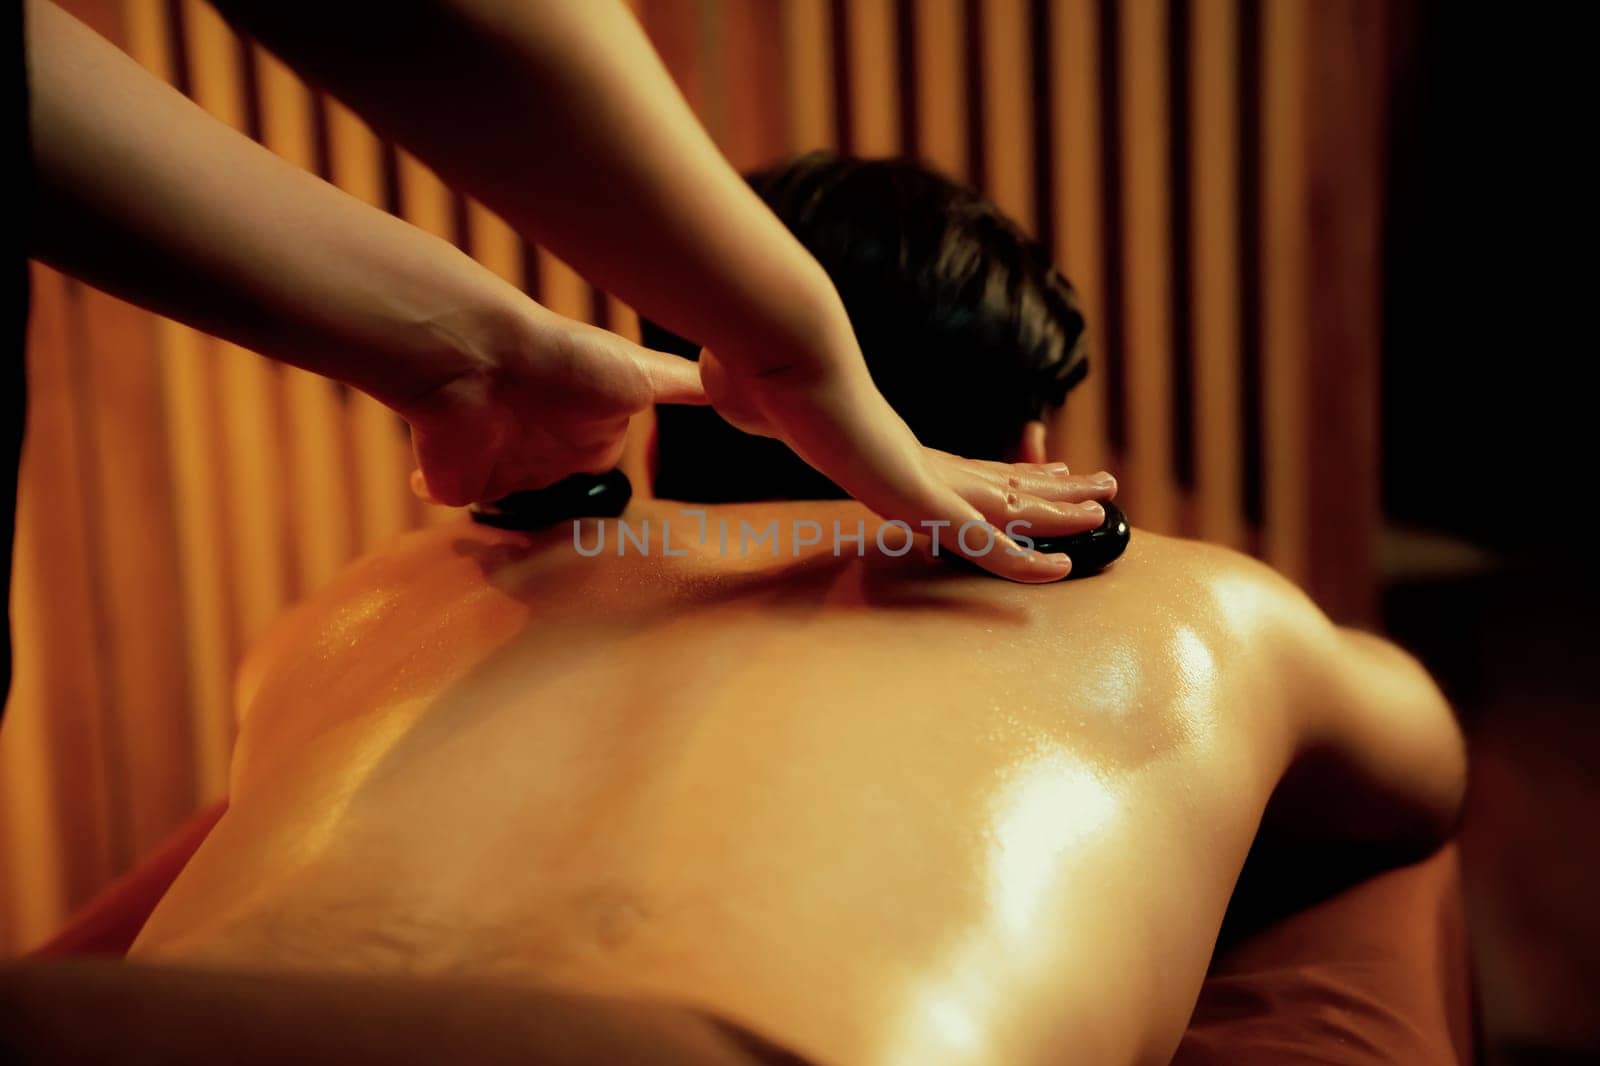 Hot stone massage at spa salon in luxury resort with warm candle light, blissful man customer enjoying spa basalt stone massage glide over body with soothing warmth. Quiescent